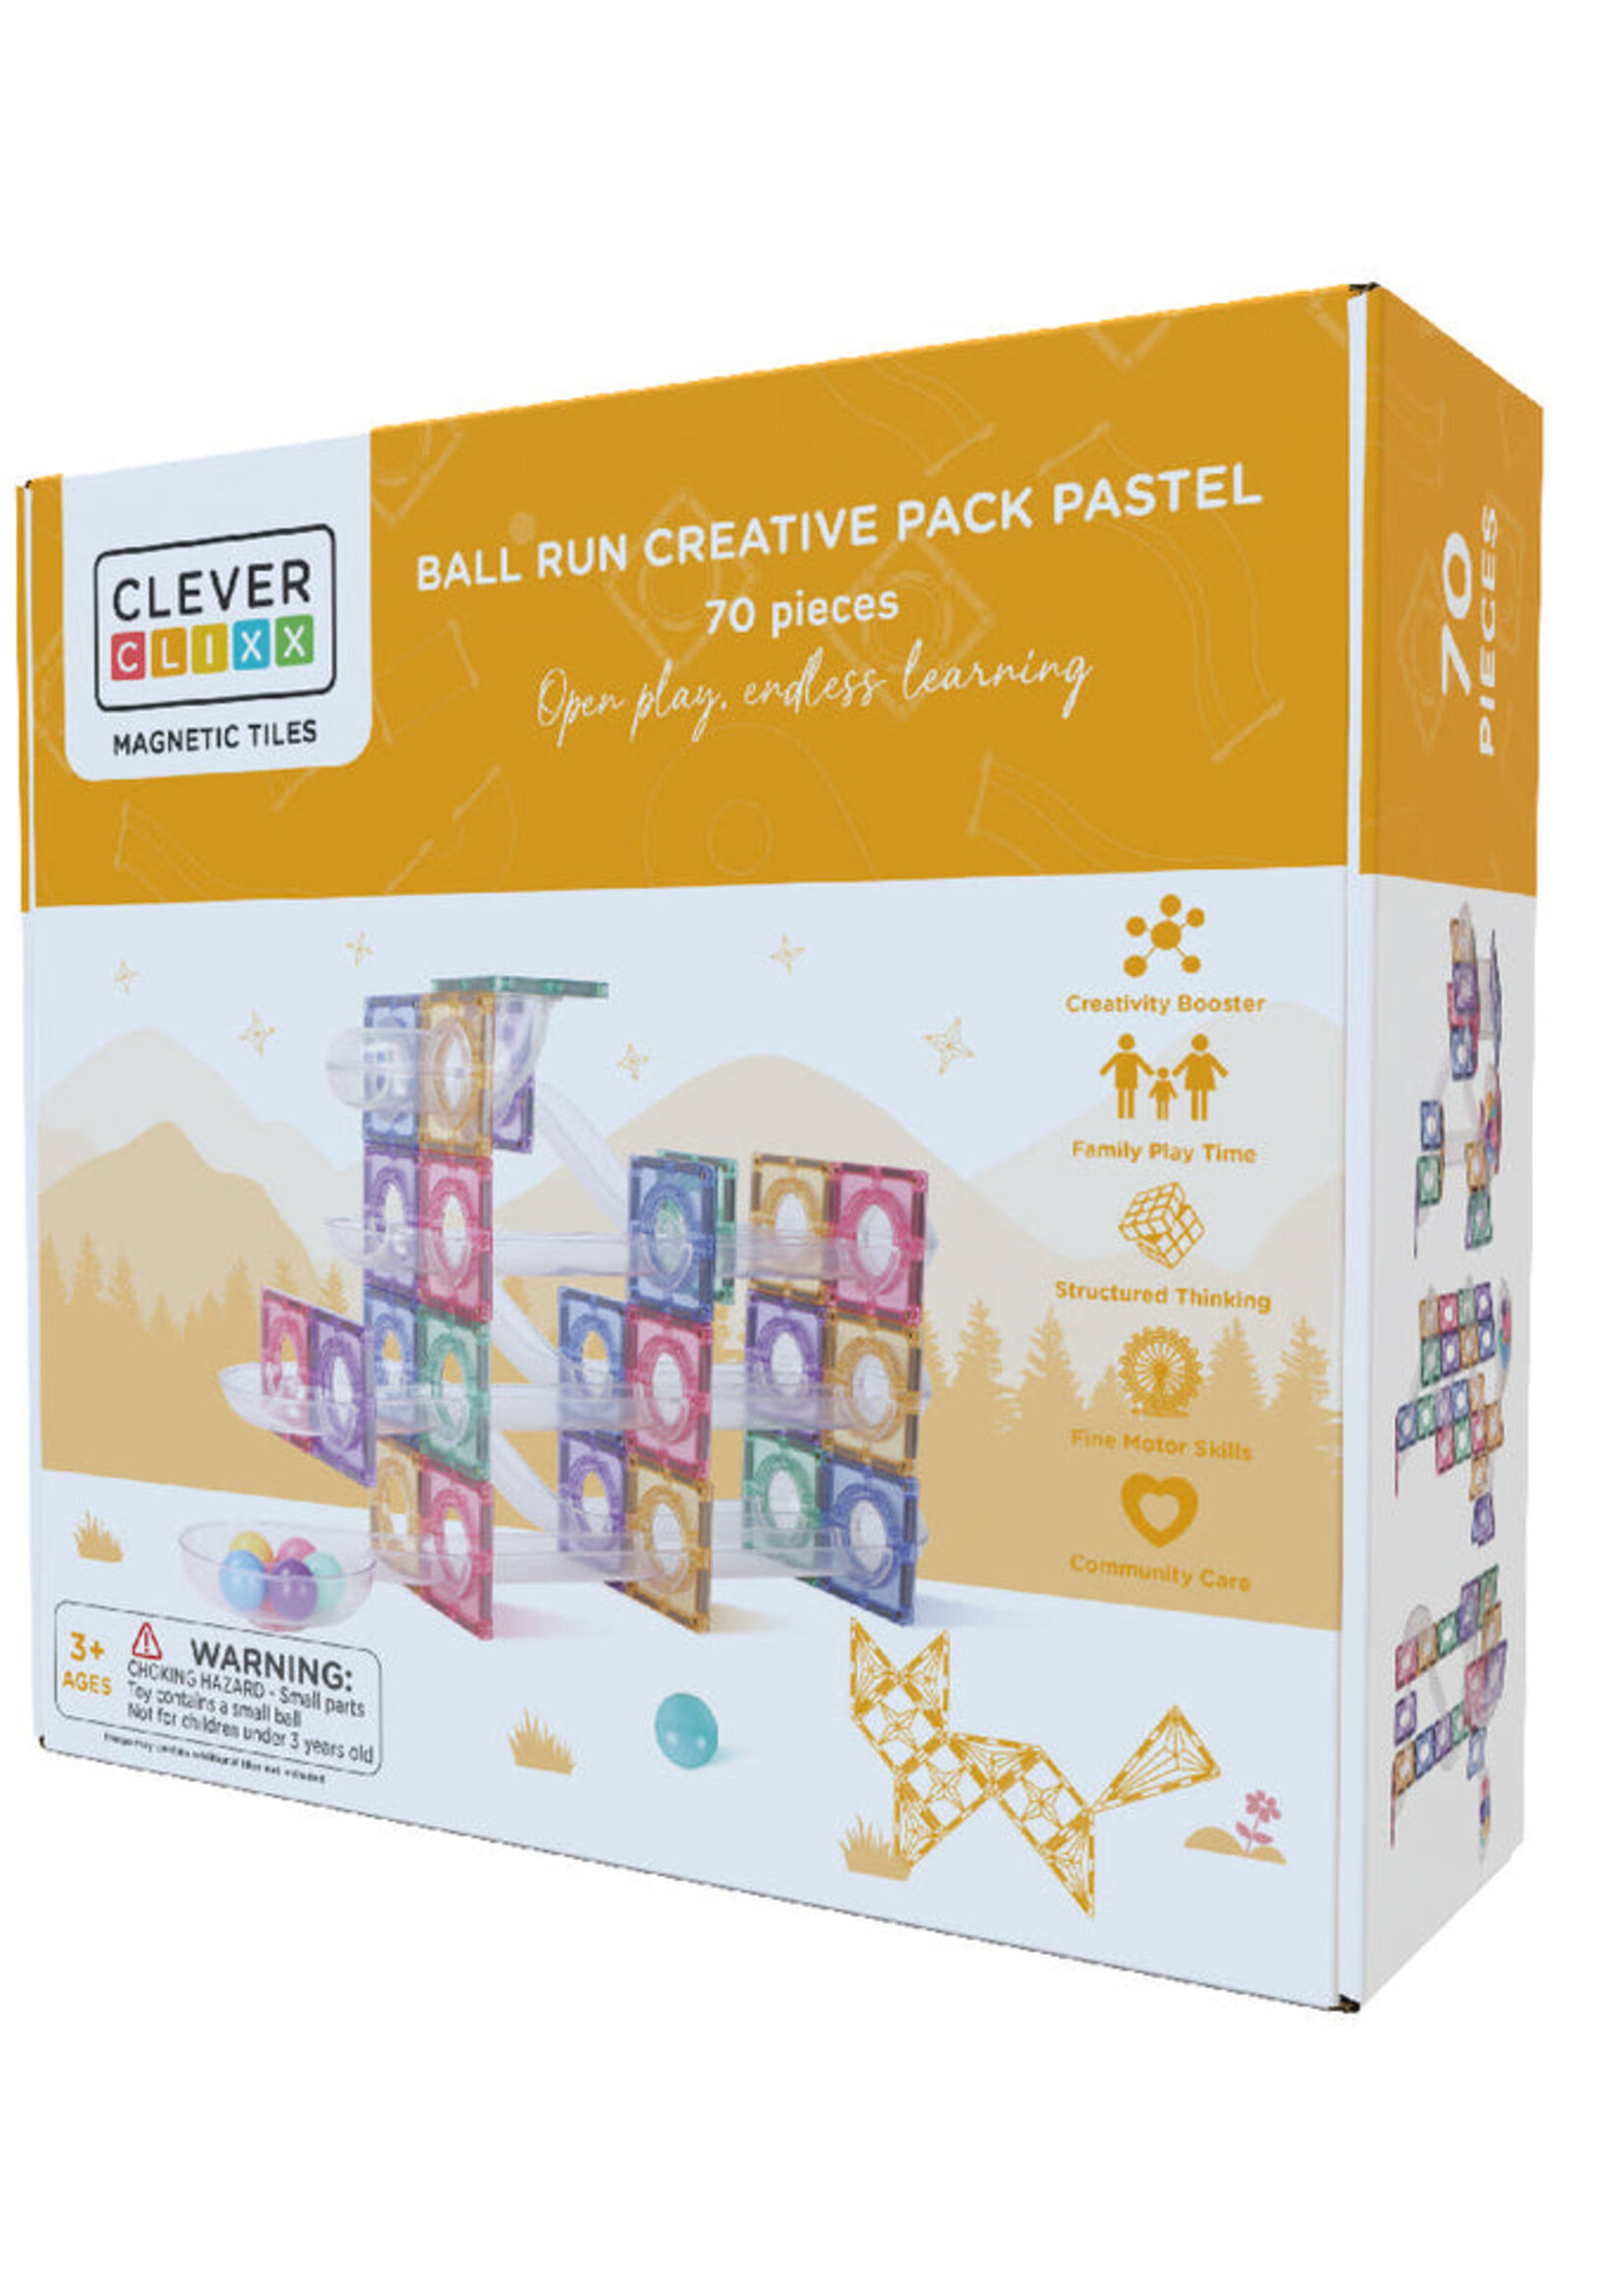 Cleverclixx Cleverclixx | Ball Run Creative Pack Pastel - 70 Pieces